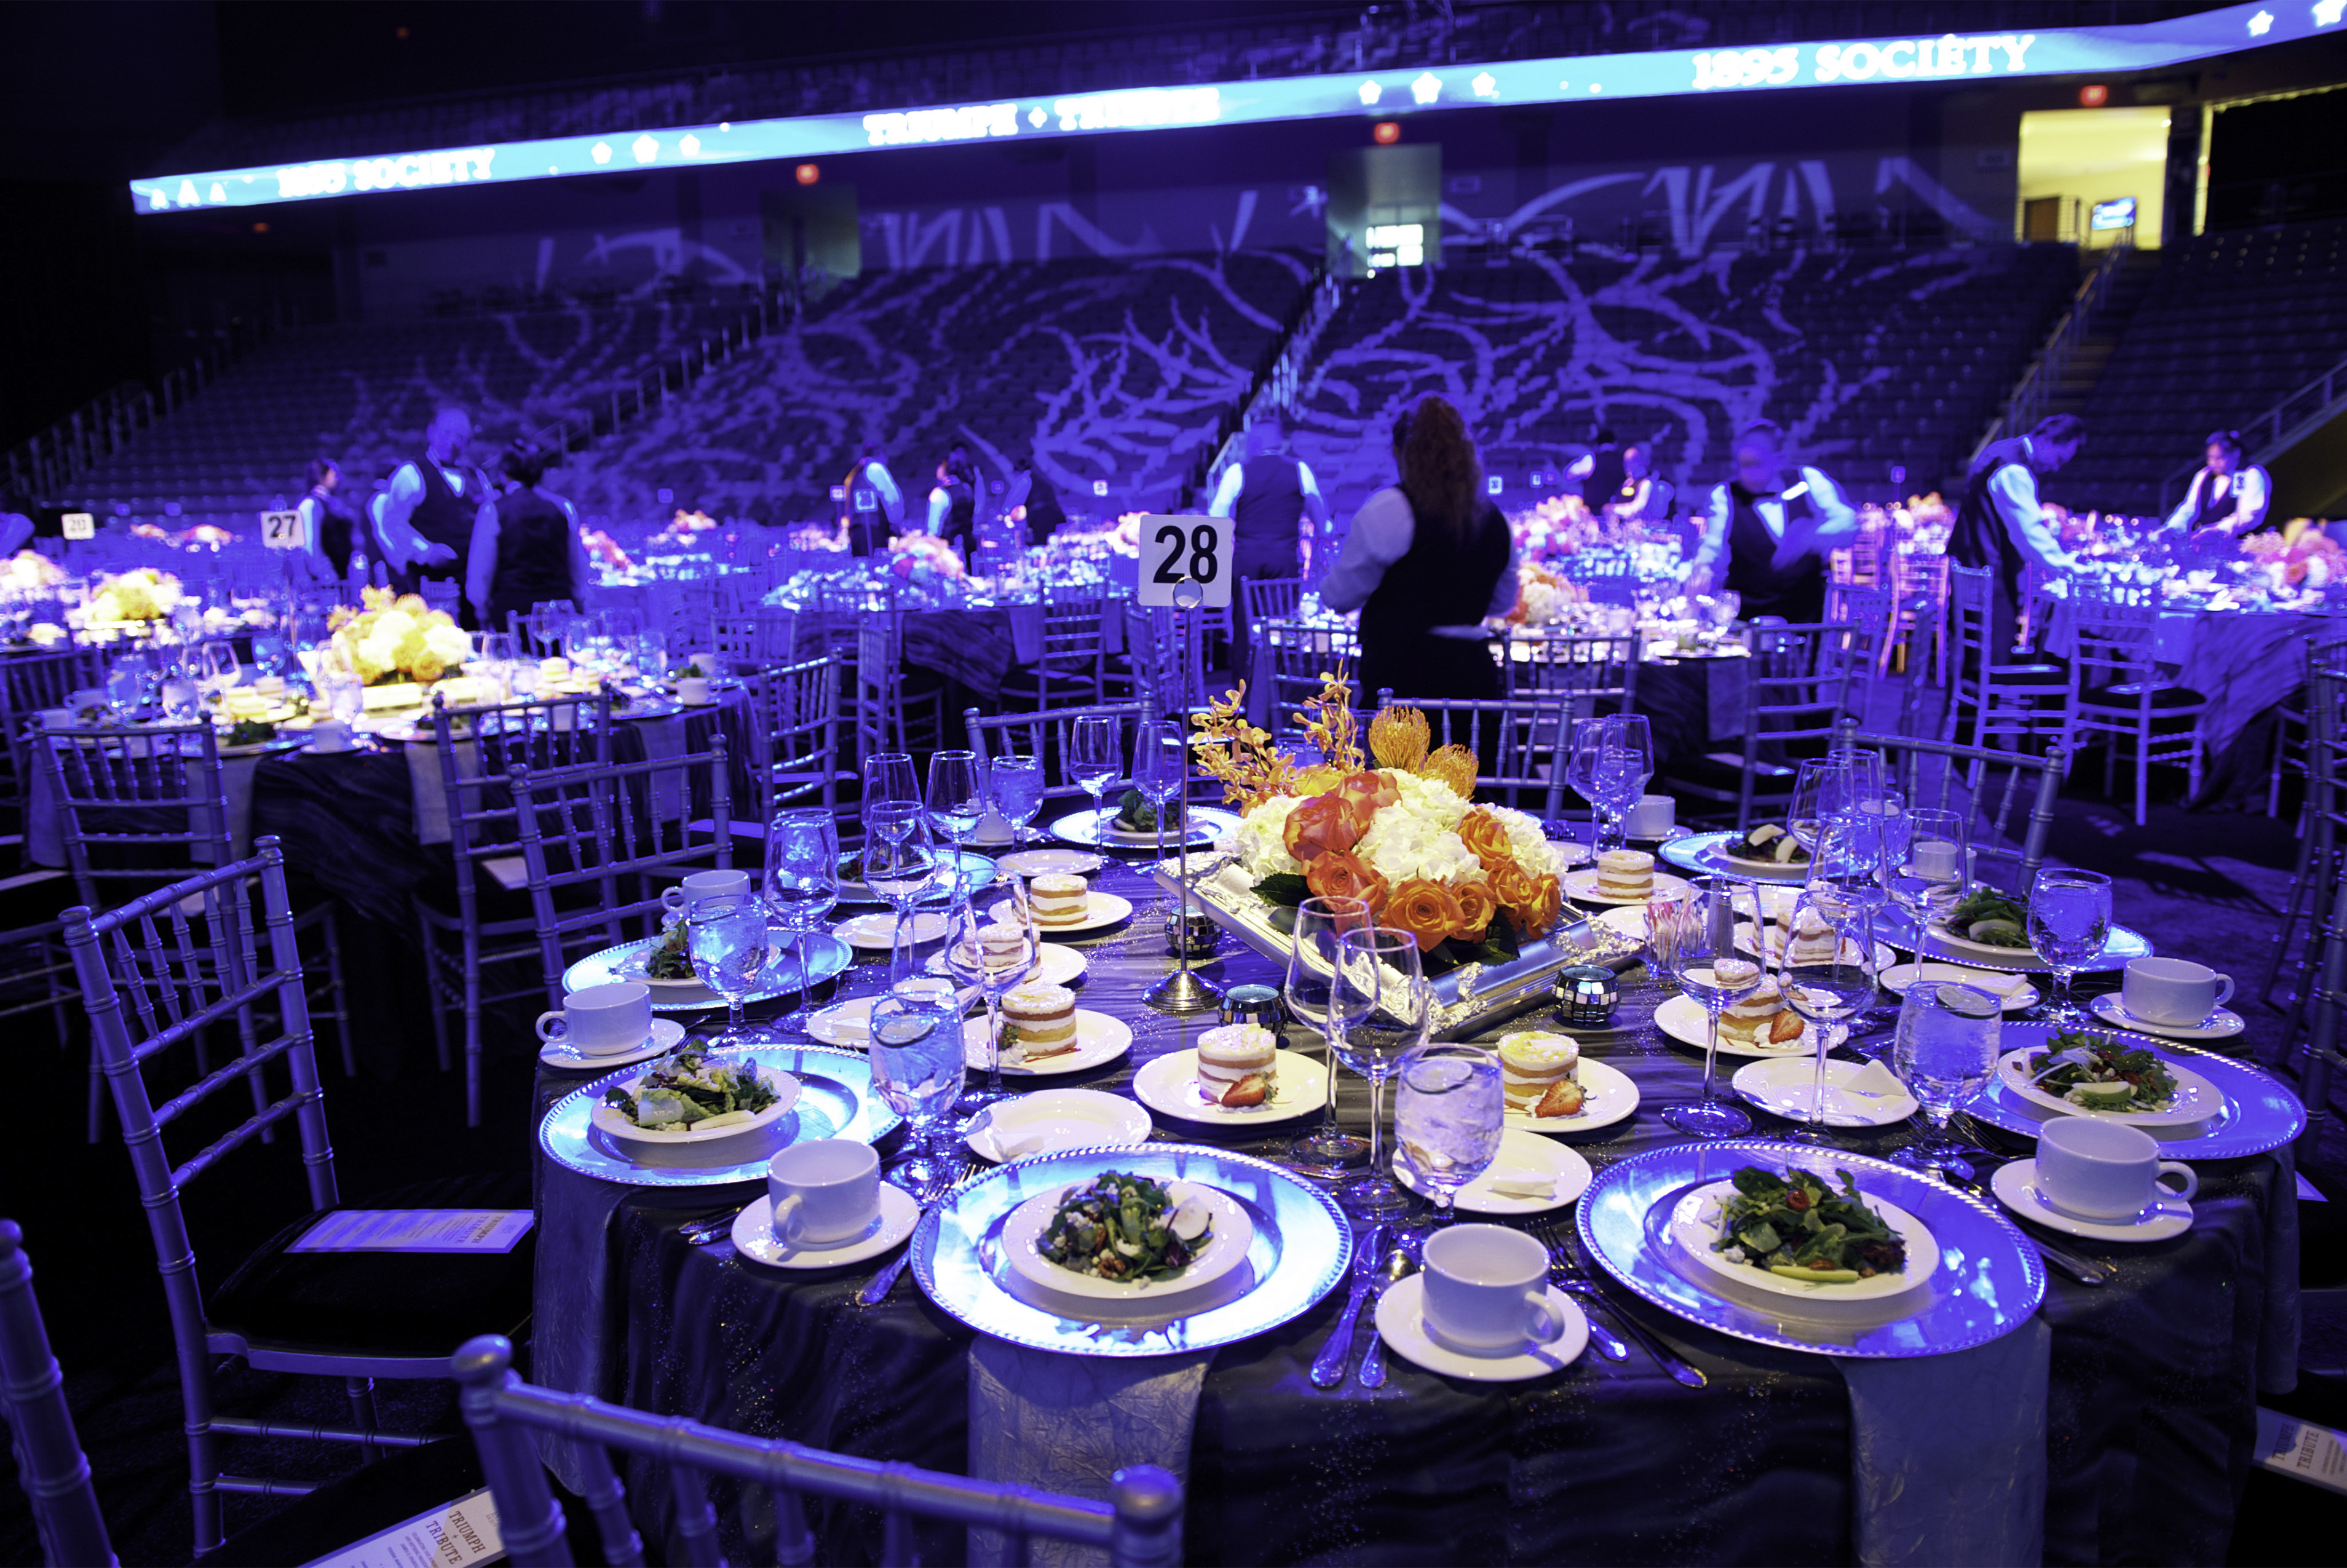 A banquet set up on the College Park Center arena floor. Low lighting